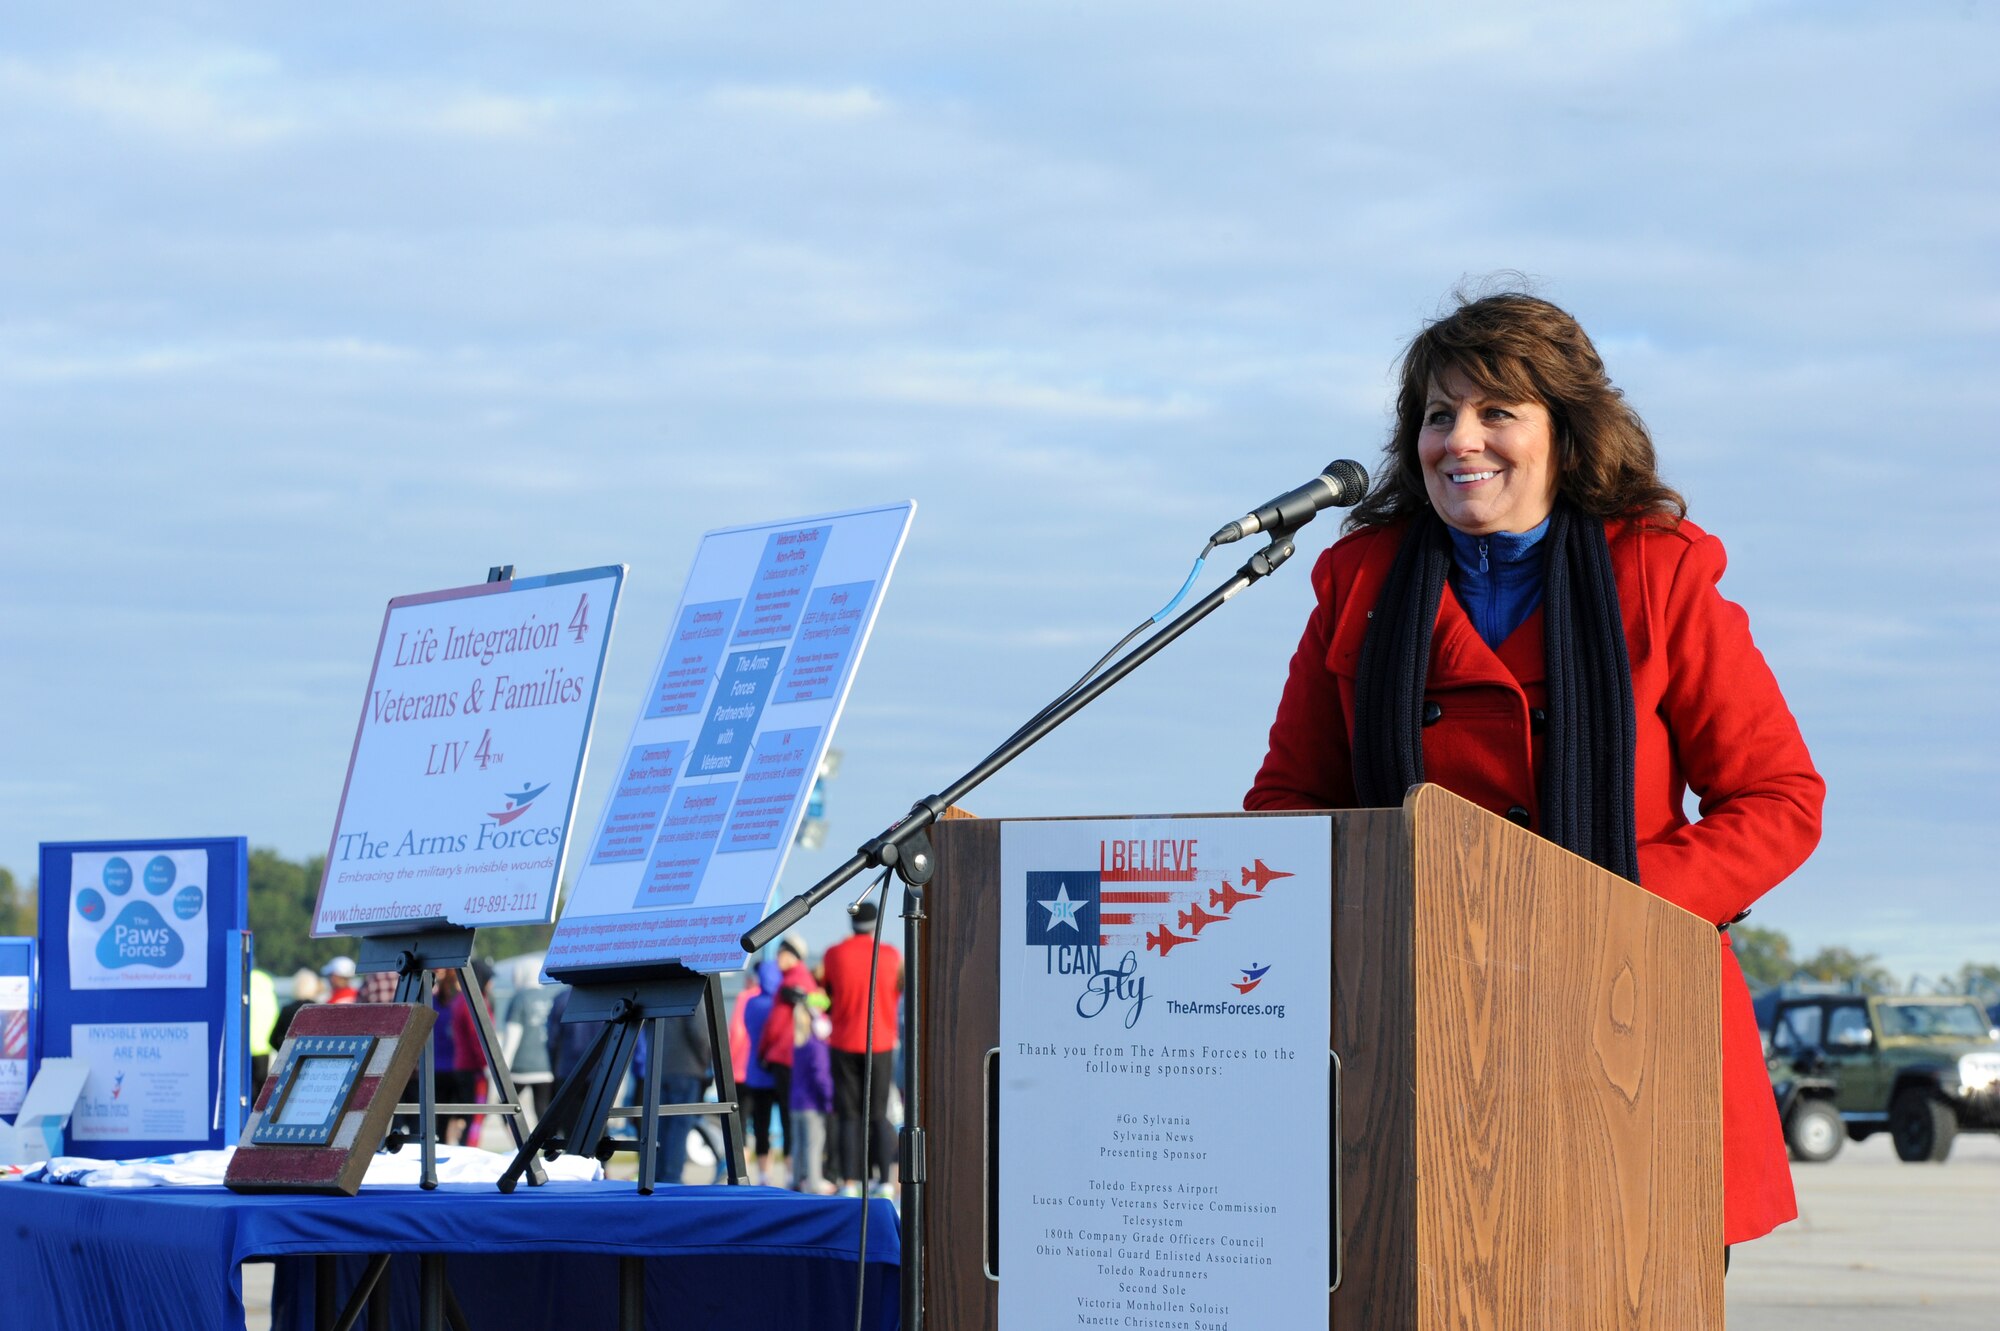 Pam Hayes, founder of The Arms Forces and coordinator of the I Believe I Can Fly 5k, addresses runners and supporters before the race Oct. 18, 2015 in Swanton, Ohio. Men and Women of the 180th FW traded combat boots for running shoes, joining local community members in a 5k race, hosted by the Arms Forces Organization, raising awareness about traumatic brain injuries. The Arms Forces provides education and programs allowing veterans past and present, who have a traumatic brain injury or post-traumatic stress disorder to find understanding, purpose and direction as they face the other war while living at home with their invisible injury. Air National Guard Photo by Staff Sgt. John Wilkes/Released.